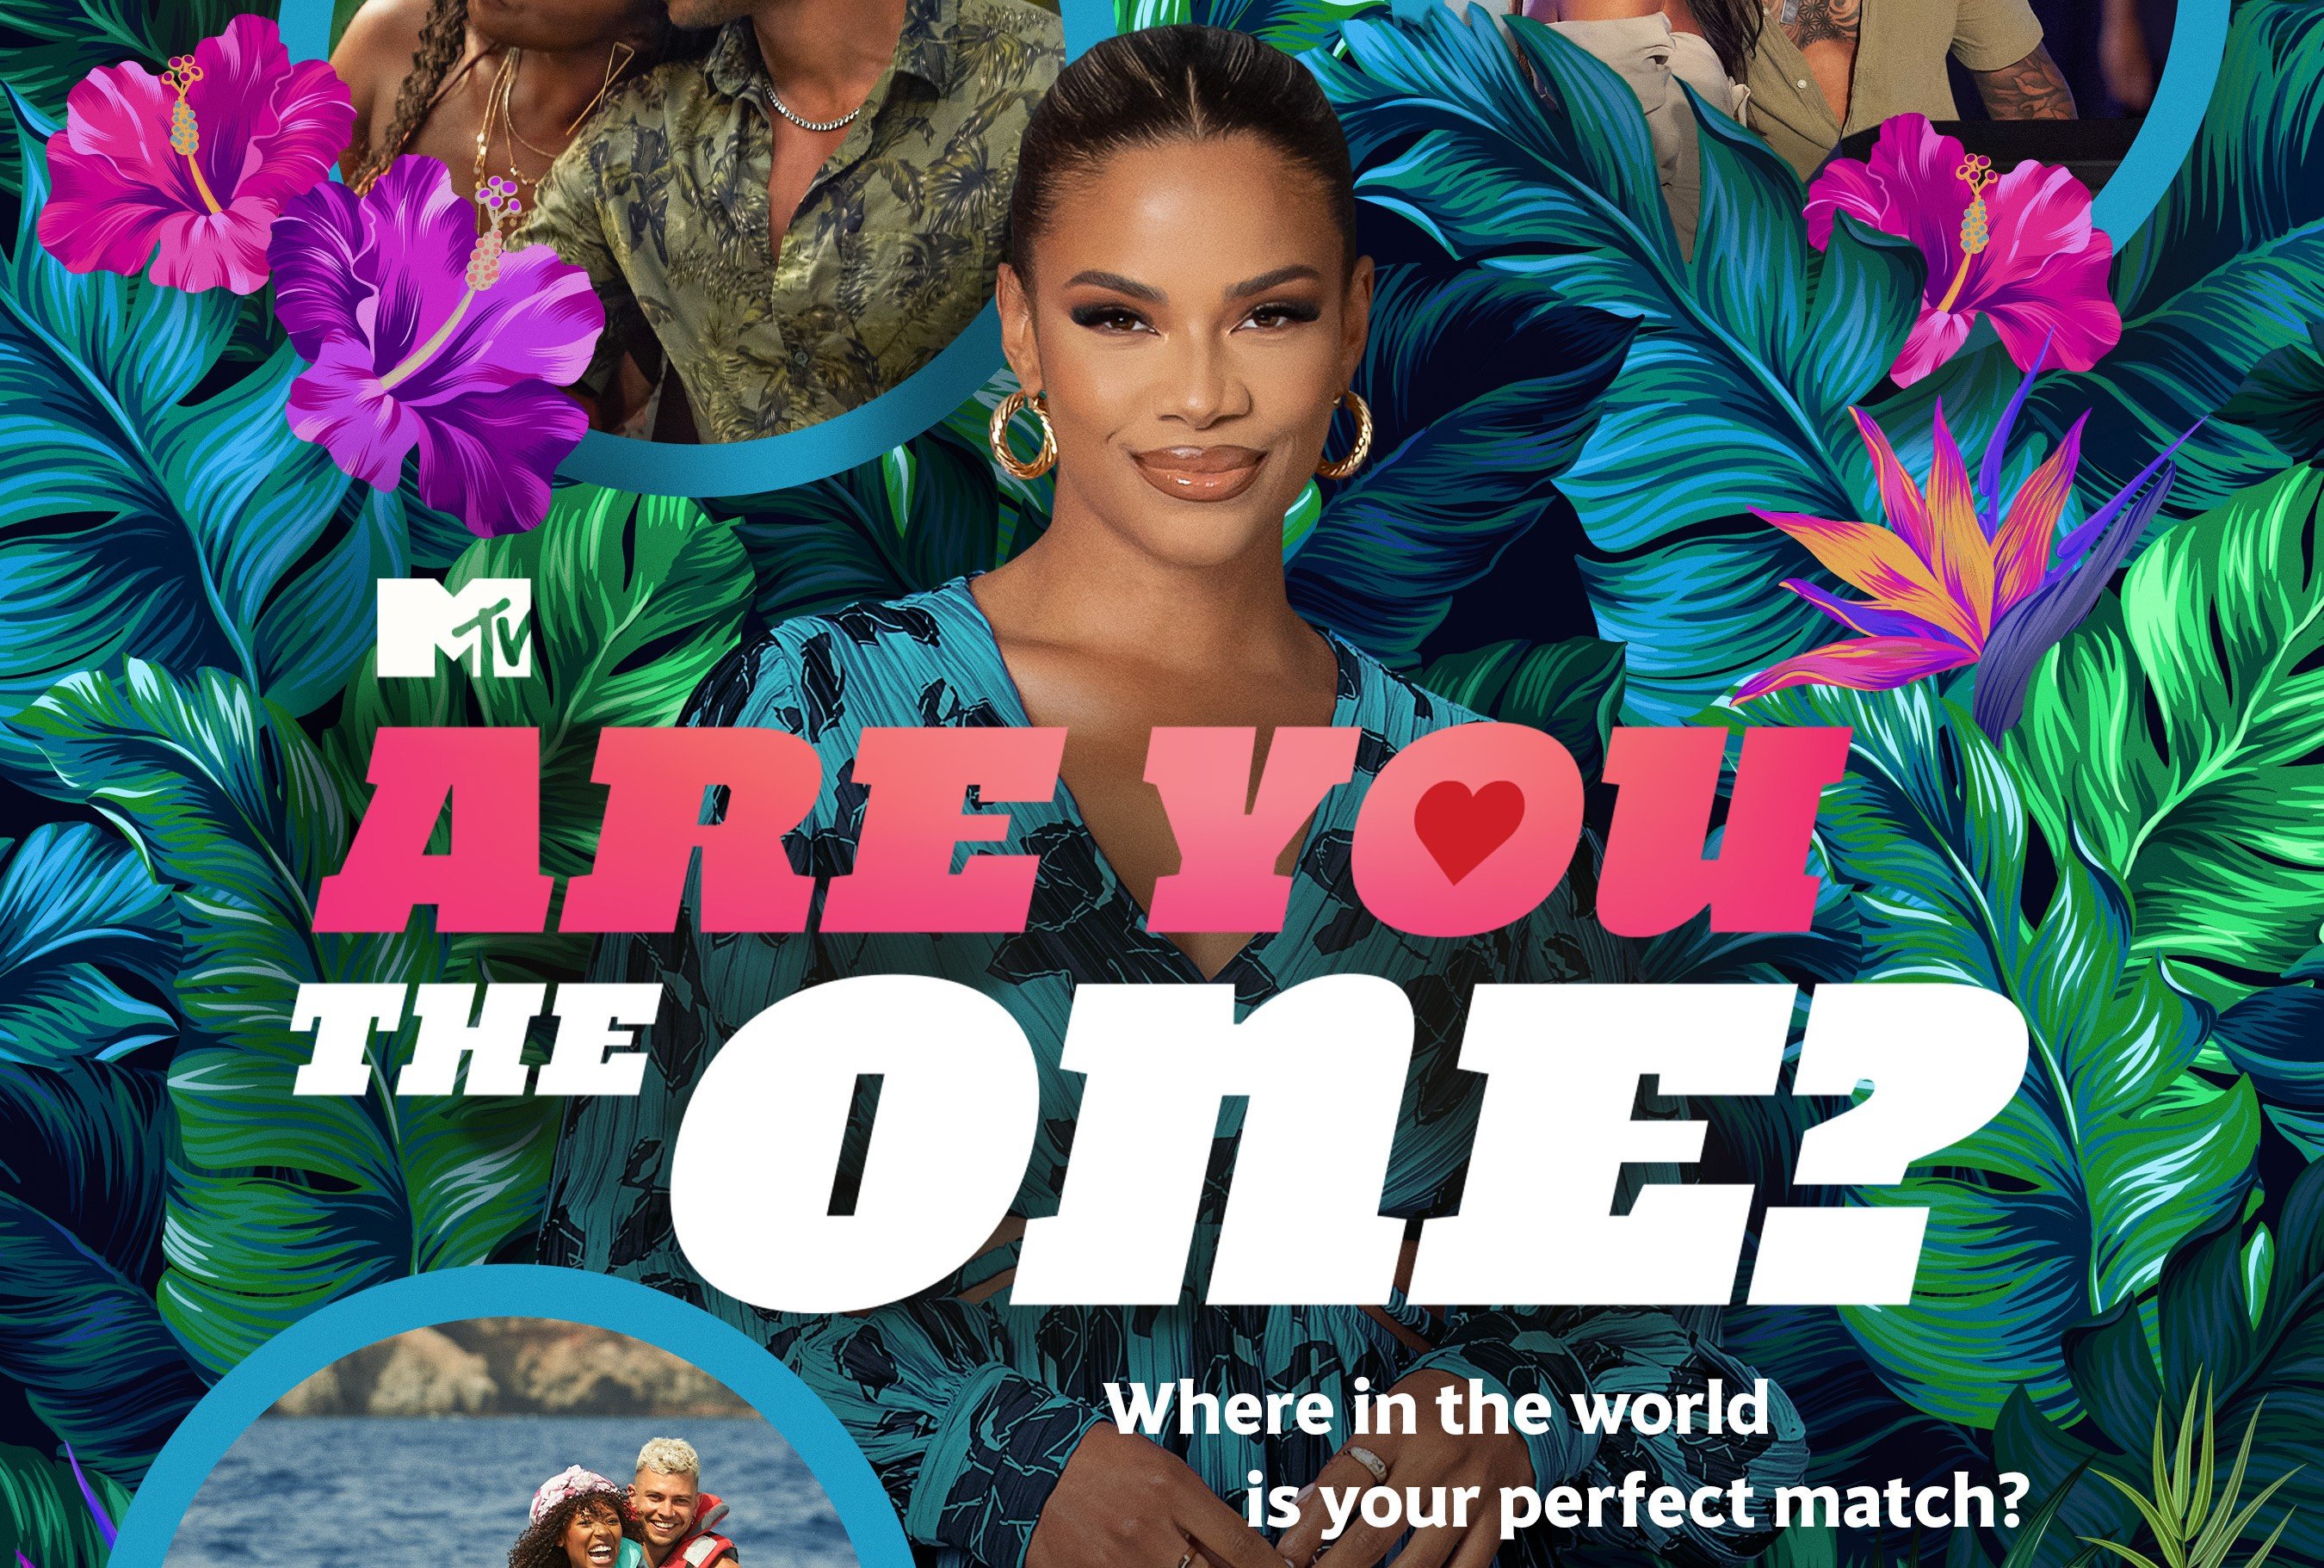 Kamie Crawford, the host of 'Are You the One?' Season 9, appears on Paramount+'s poster for the season. Crawford wears a light blue dress with black flowers on it. The poster contains the show's name, a background of colorful leaves and flowers, and the slogan — 'Where in the world is your perfect match?'